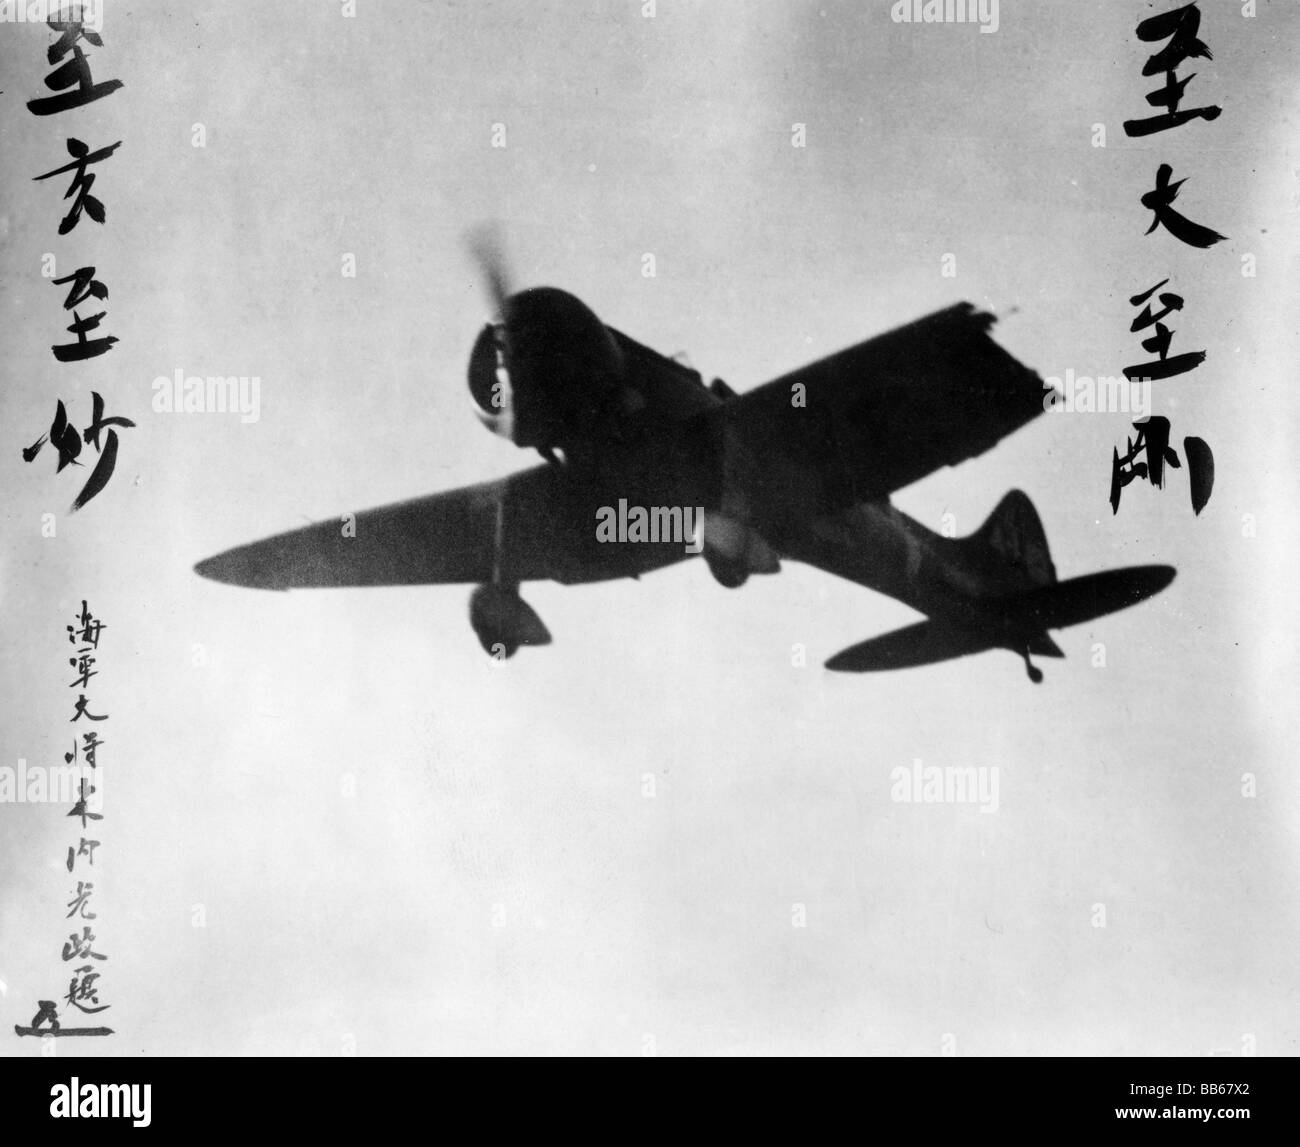 geography / travel, China, politics, Second Sino-Japanese War 1937 - 1945, Japanese navy aeroplane returning from Nanking despite a collision with a Chinese plane, late 1937, missing wing, torn of, aircraft, planes, aeroplanes, aircraft, damaged, 20th century, historic, historical, Kashimura, Sino, 1930s, Stock Photo